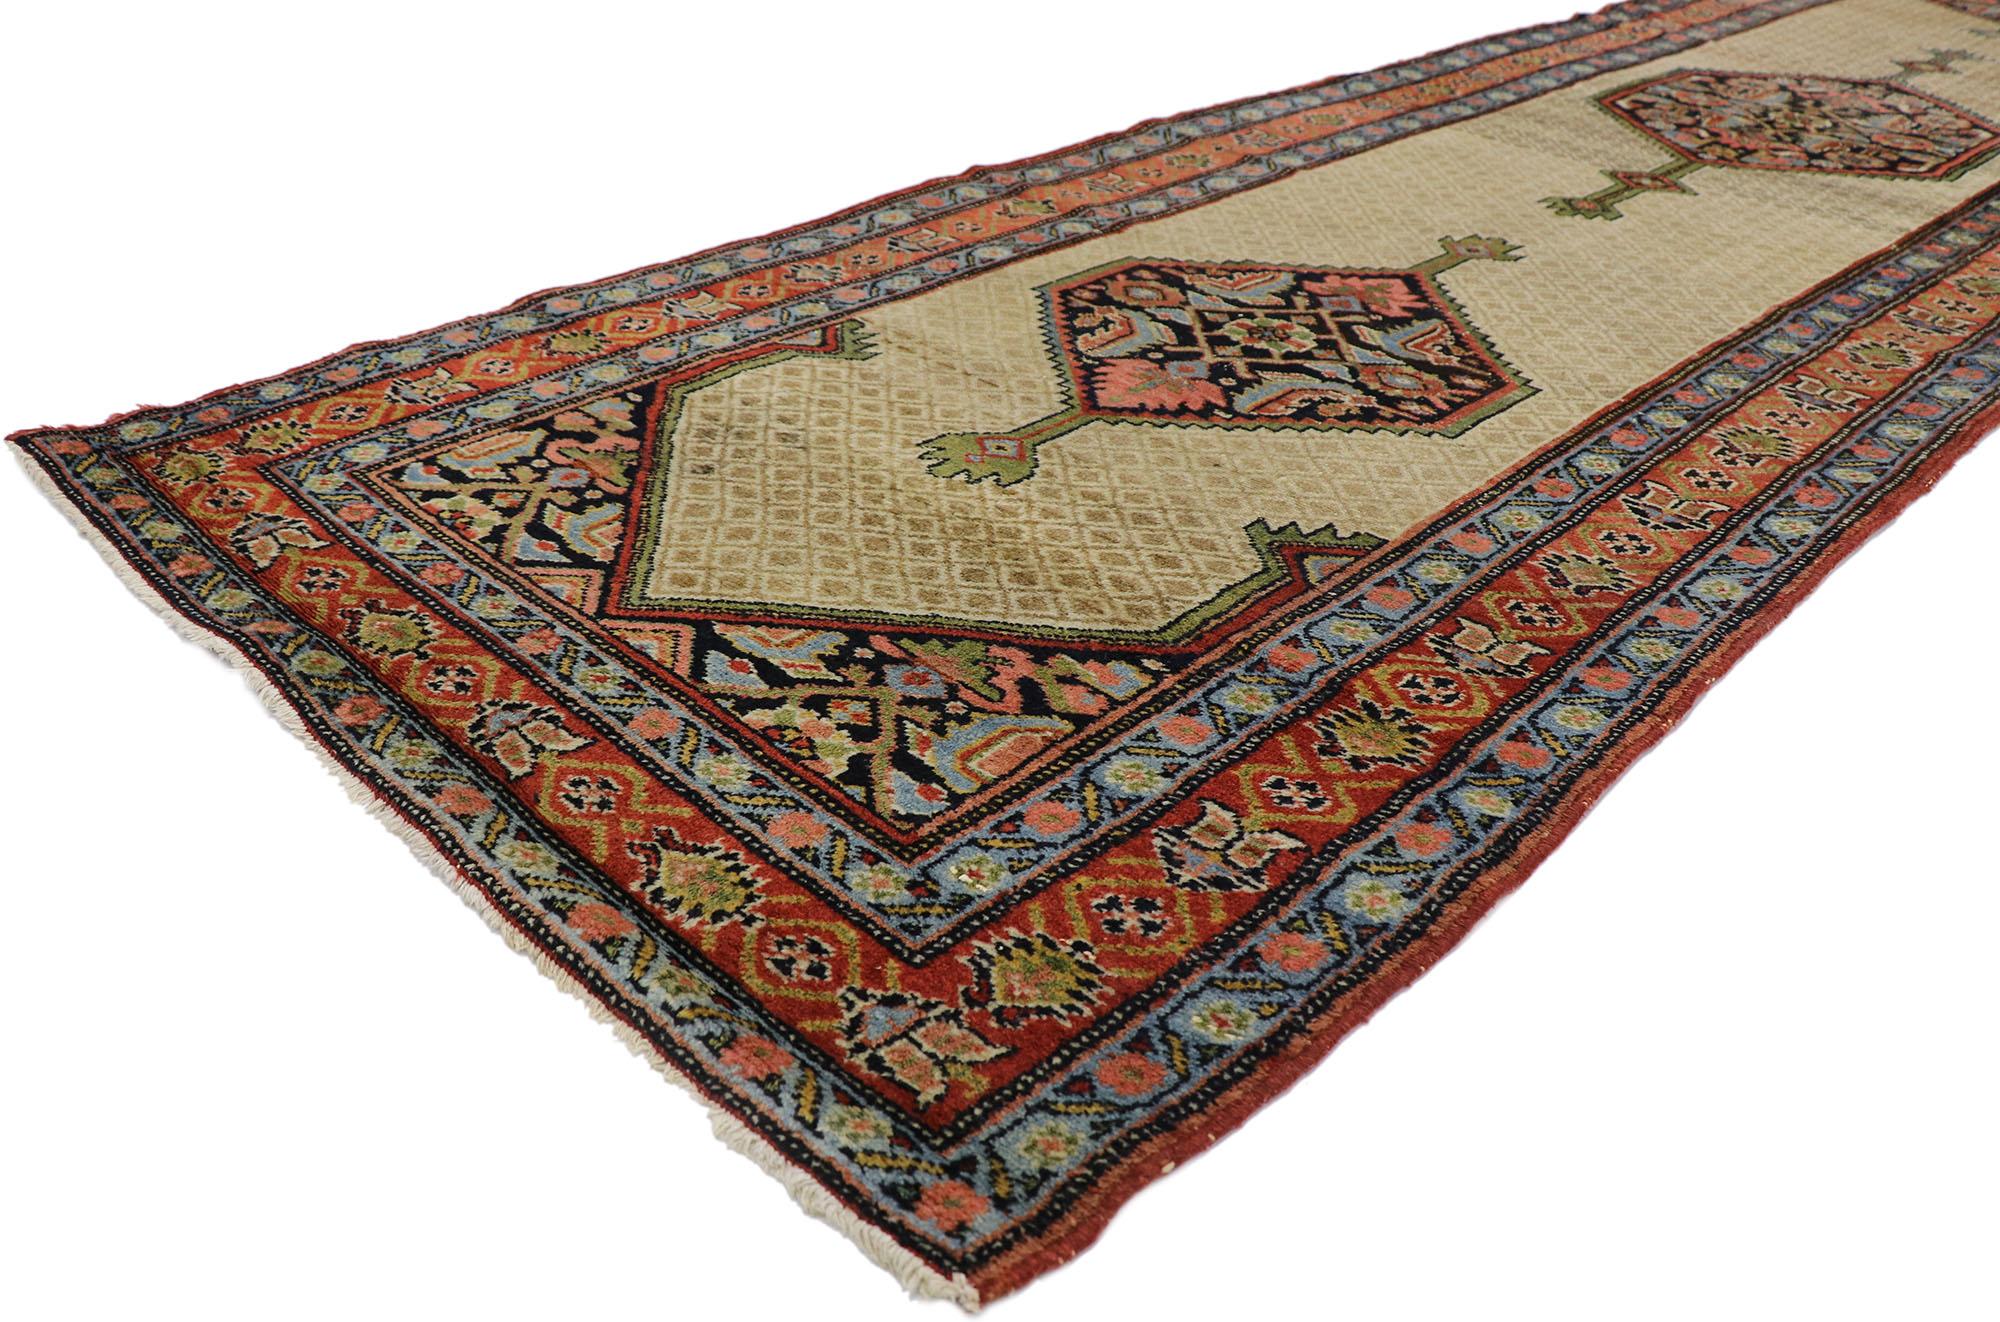 78119 antique Persian Malayer Runner with Modern Rustic English style 03'06 x 13'11. Cleverly composed and poised to impress with its rustic sensibility, this hand knotted wool antique Persian Malayer runner will take on a curated lived-in look that